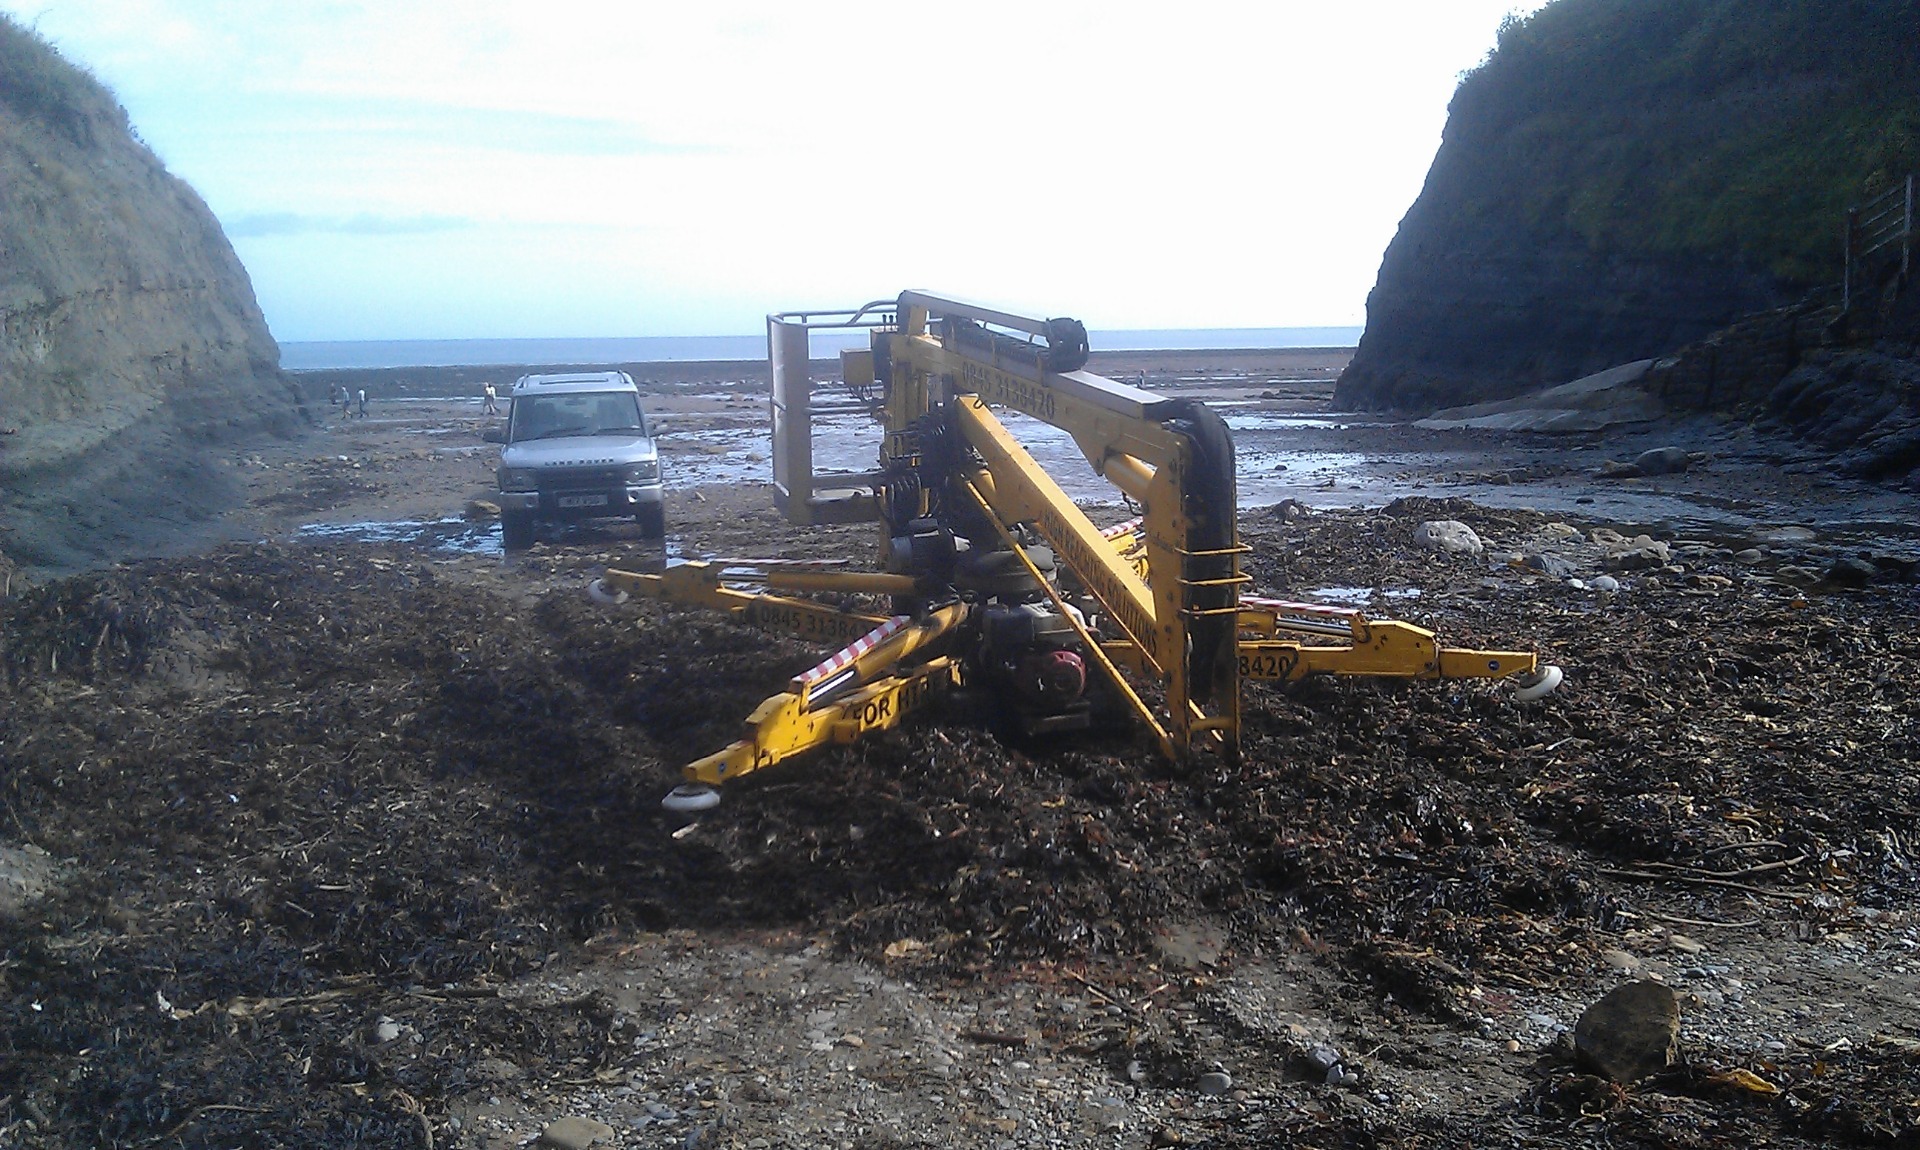 Sabrina the tracked spider cherrypicker crossing a mound of seaweed on a beach.